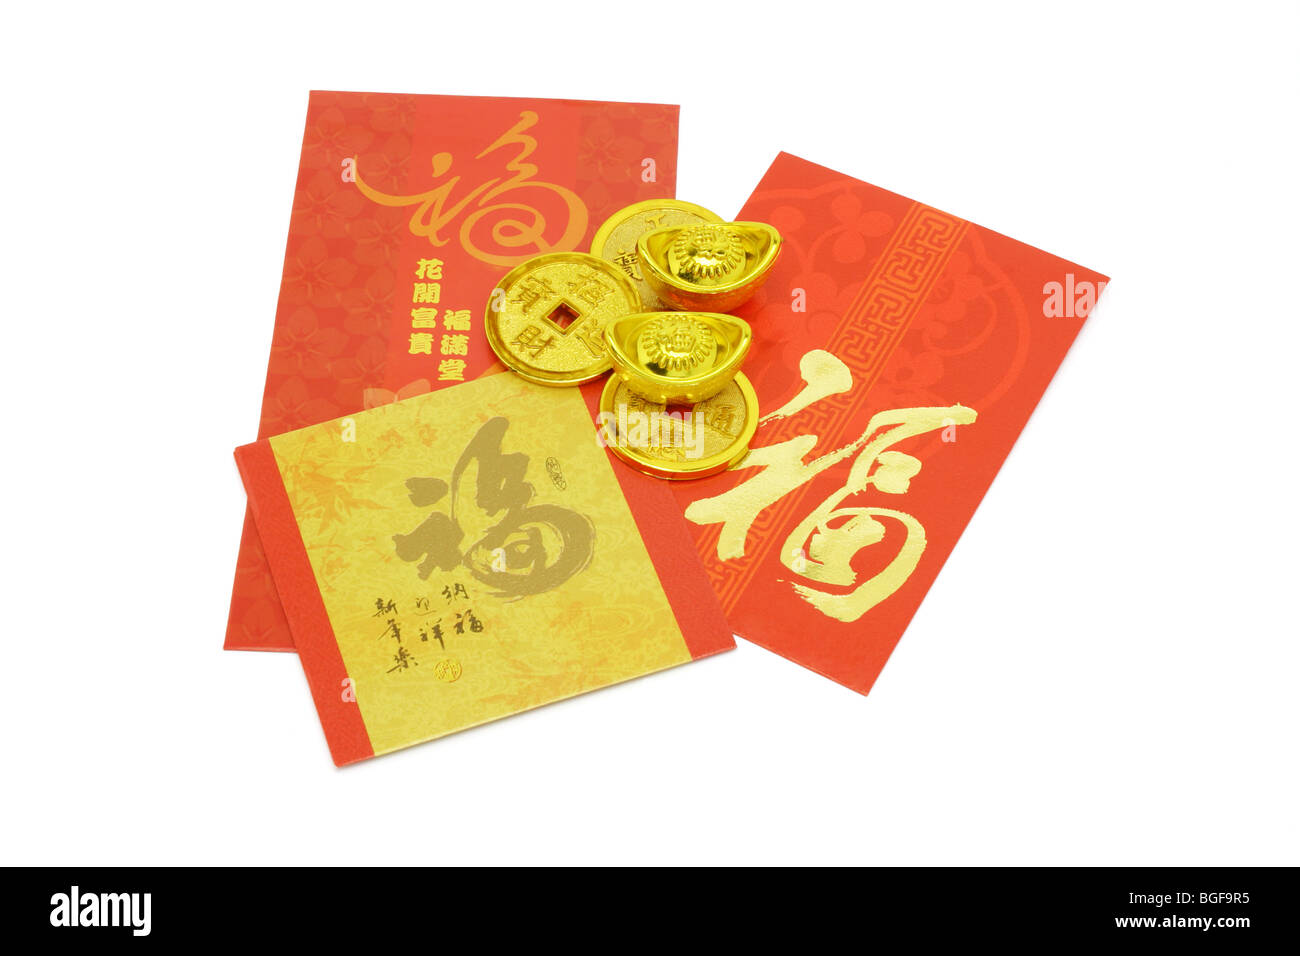 Chinese New Year ornaments gold coins, ingots and red packets Stock Photo